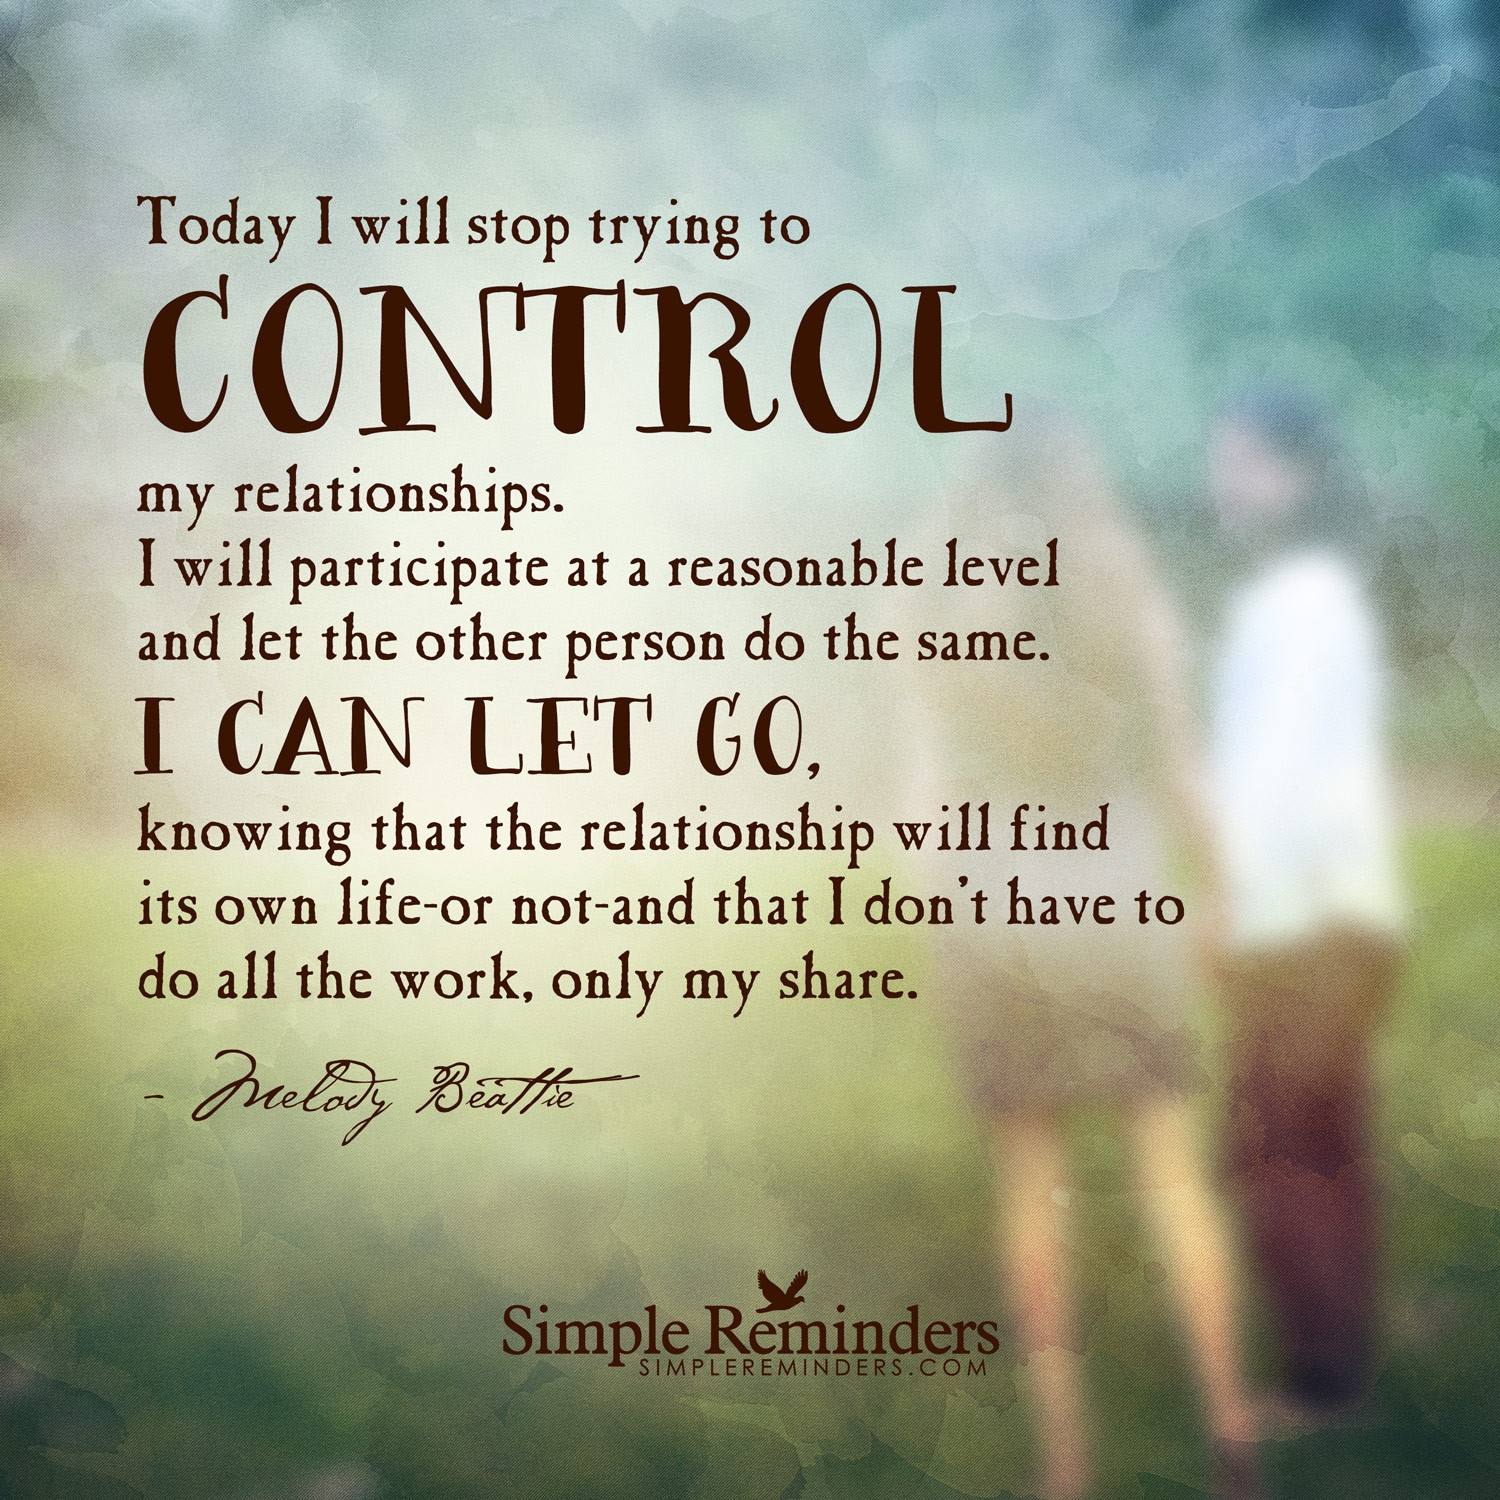 Controlling Relationship Quotes
 Quotes About Controlling Relationships QuotesGram